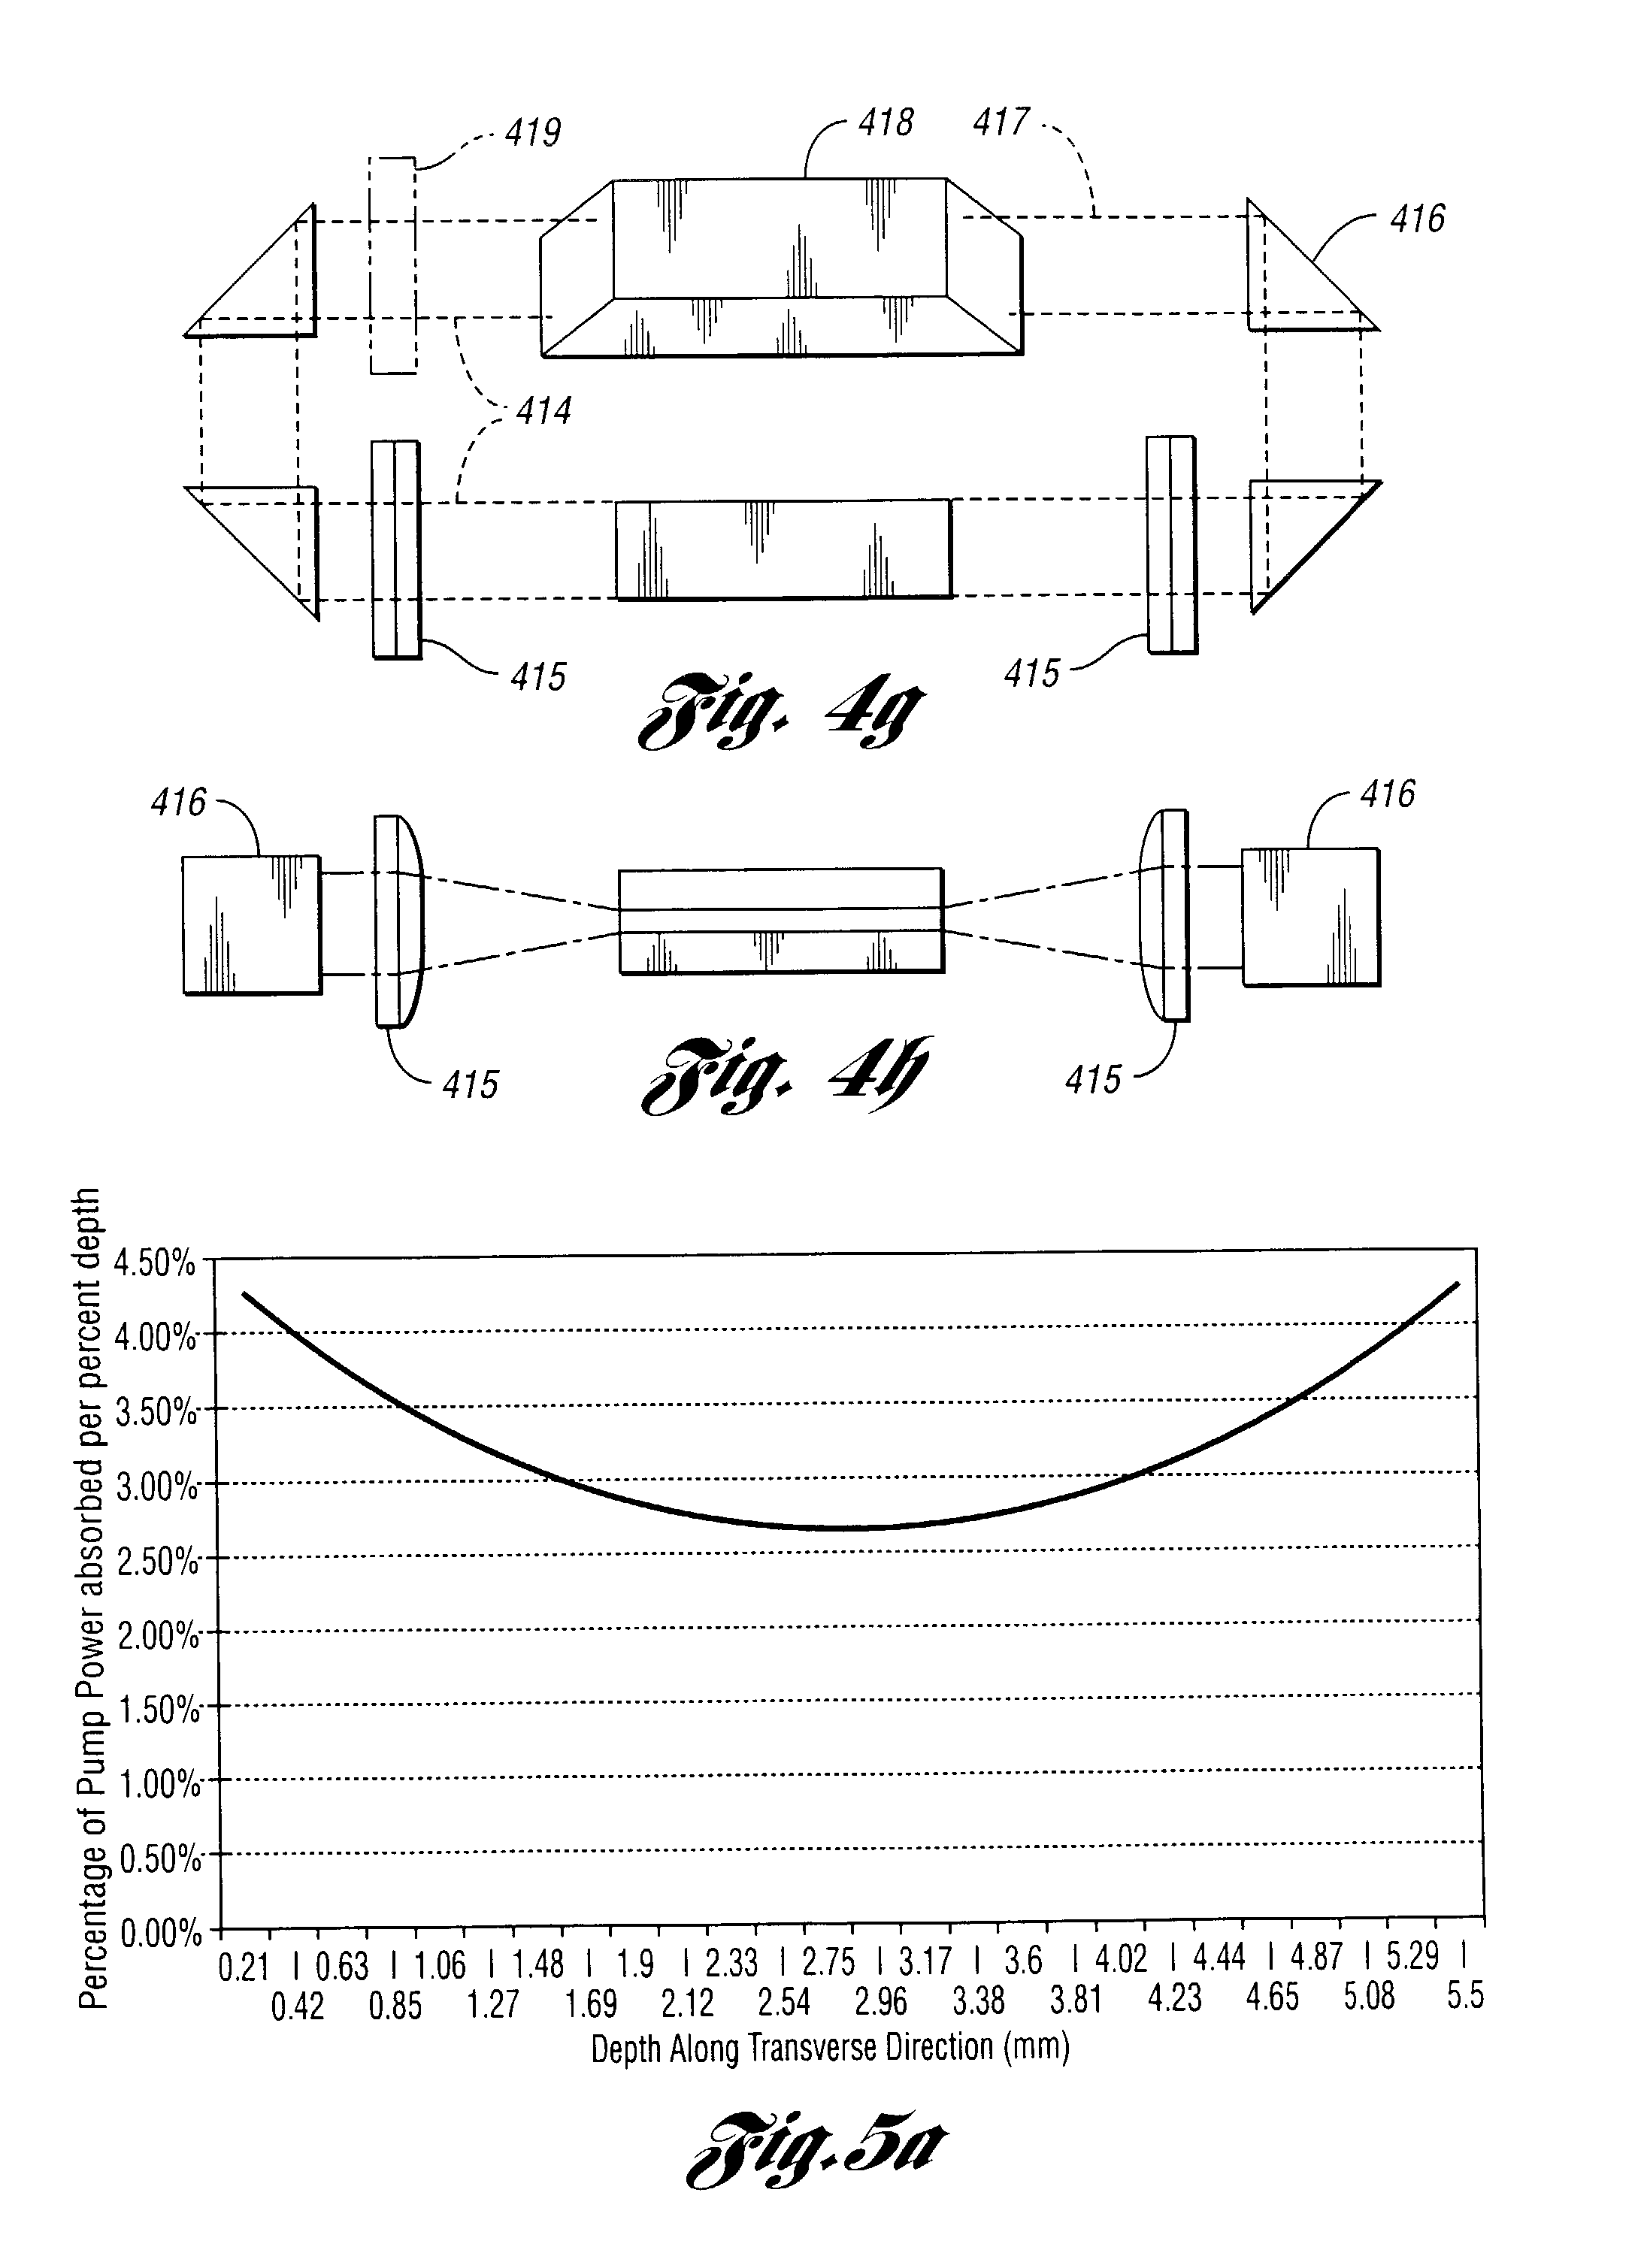 Laser based material processing methods and scalable architecture for material processing